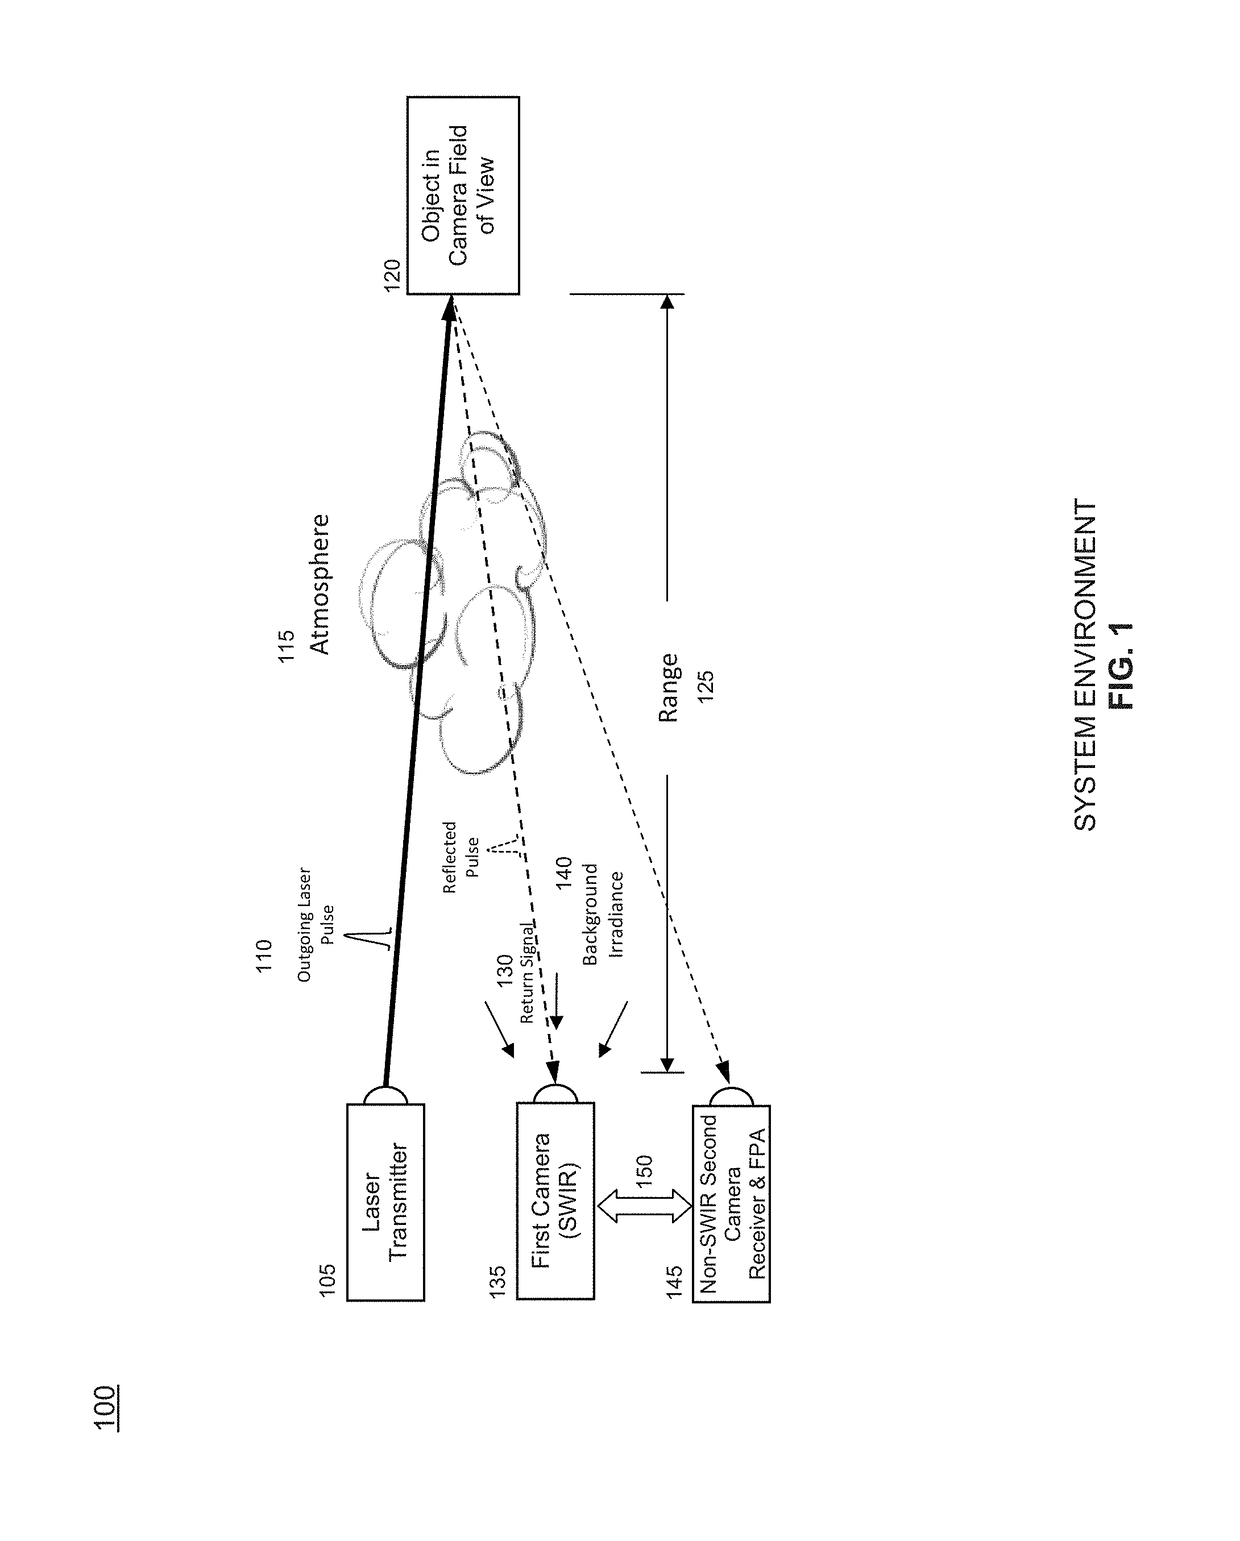 Laser detection and image fusion system and method